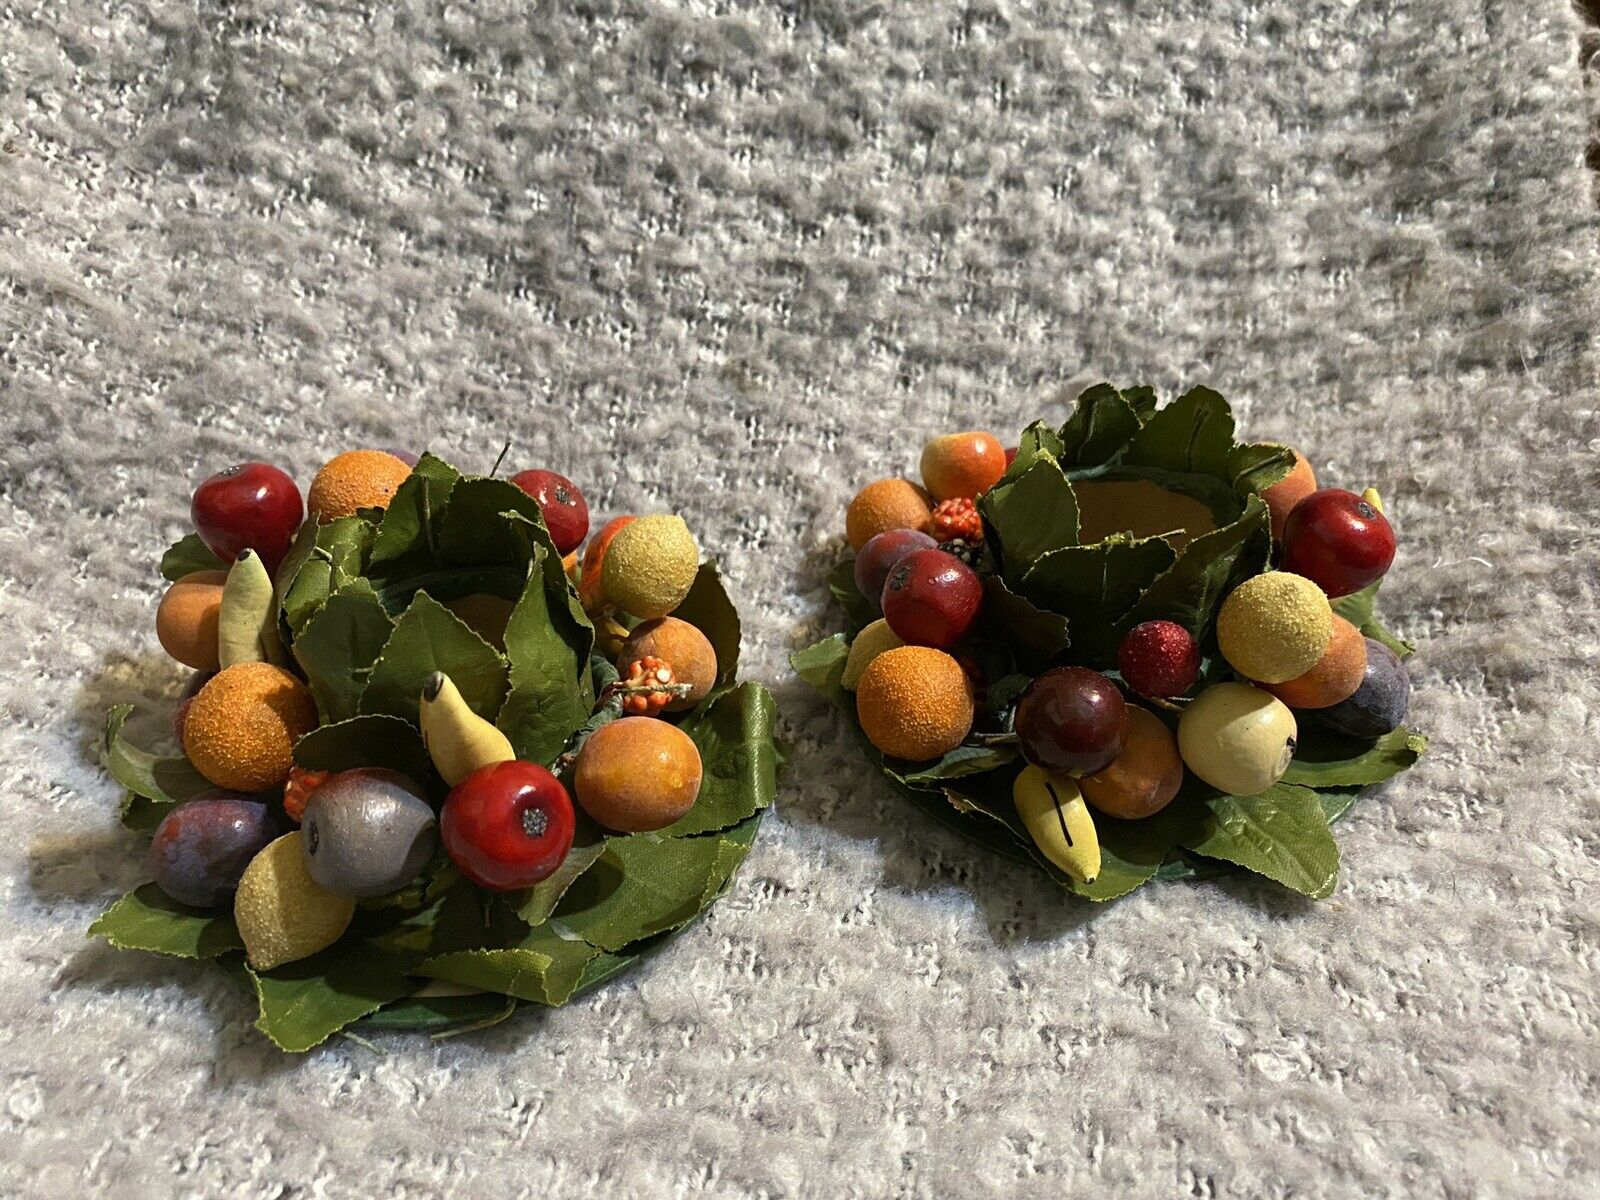 Lot of 2 Vintage Plastic Greenery And Fruit Candle Rings Handmade